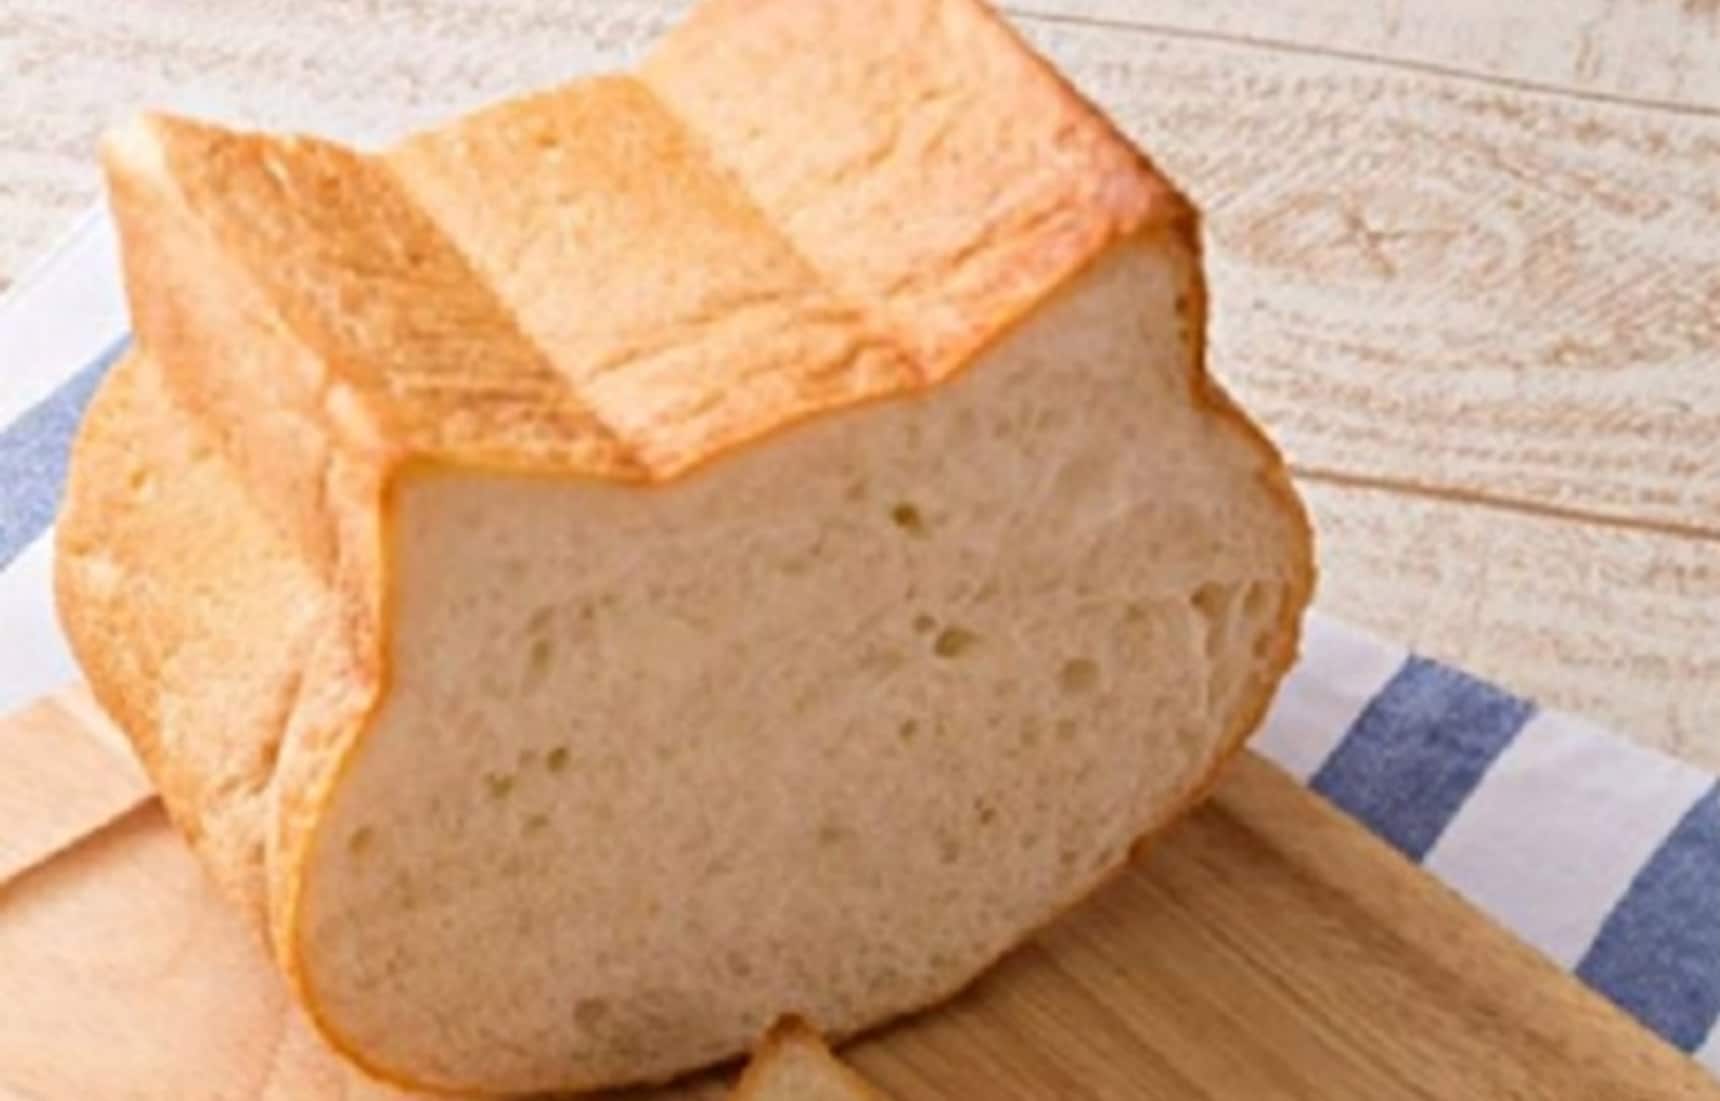 Get Your Hands on Cute Cat-Shaped Bread Slices